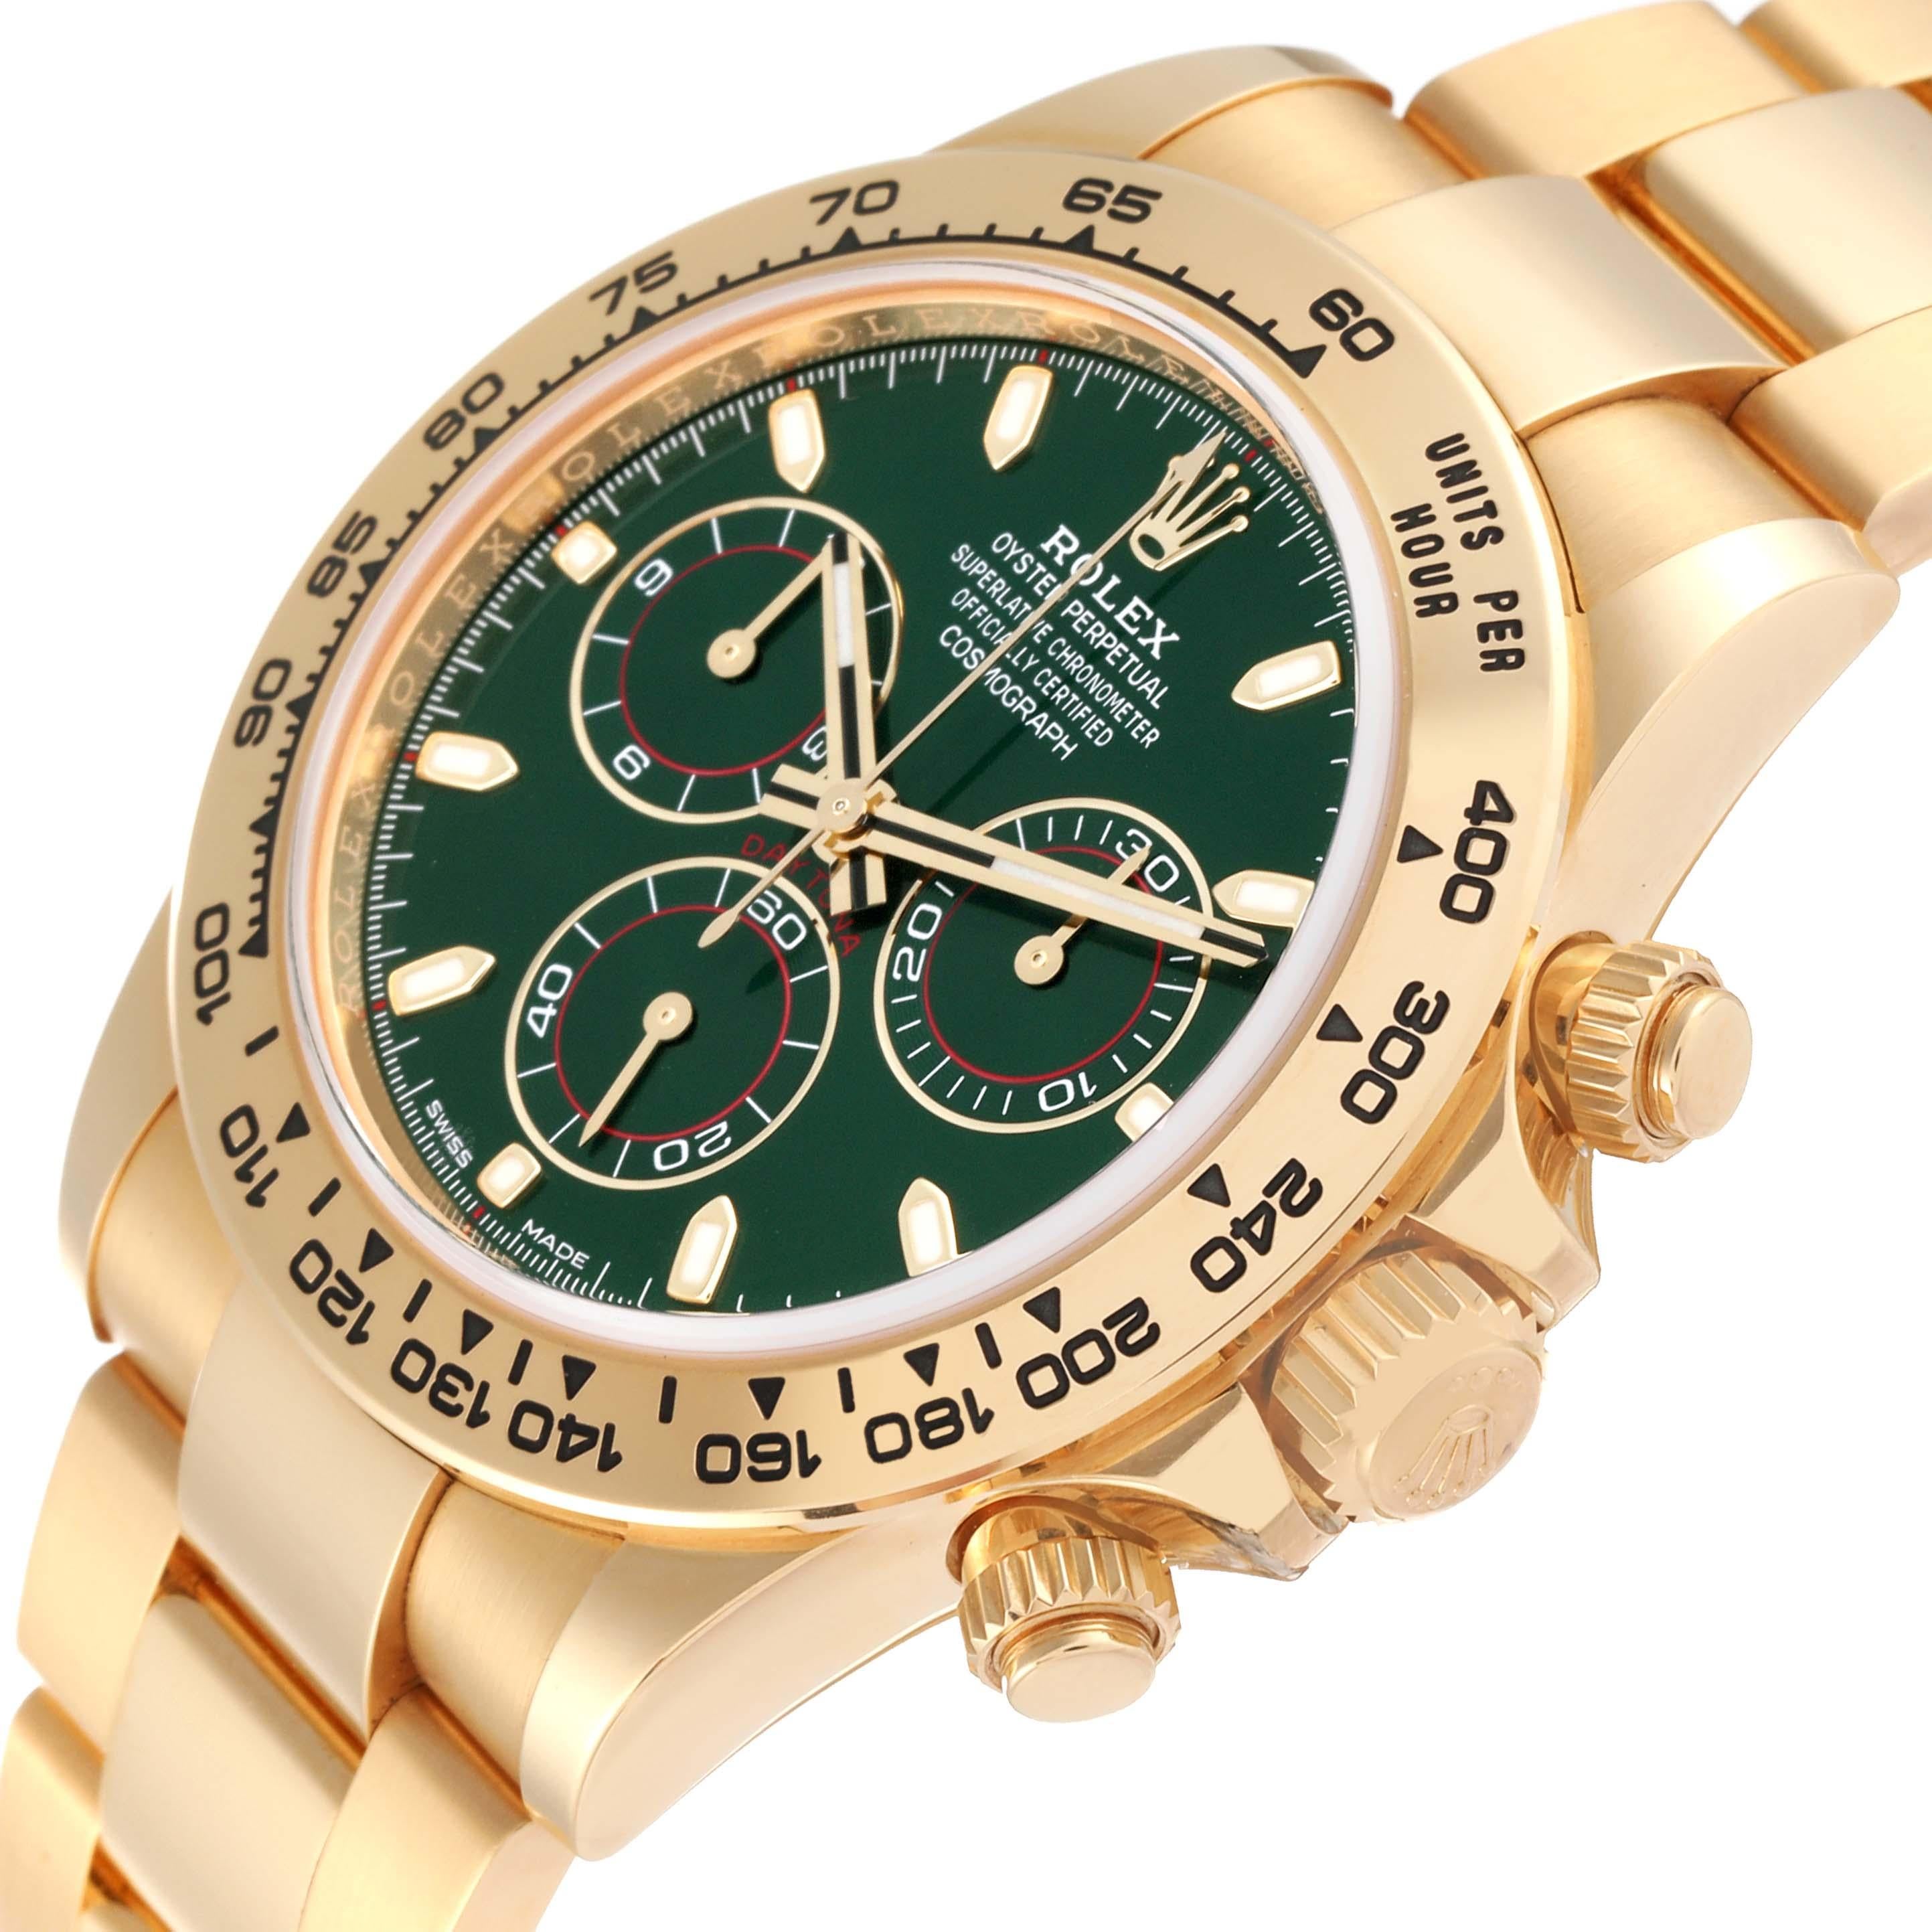 Rolex Daytona 18k Yellow Gold Green Dial Mens Watch 116508 Box Card In Excellent Condition For Sale In Atlanta, GA